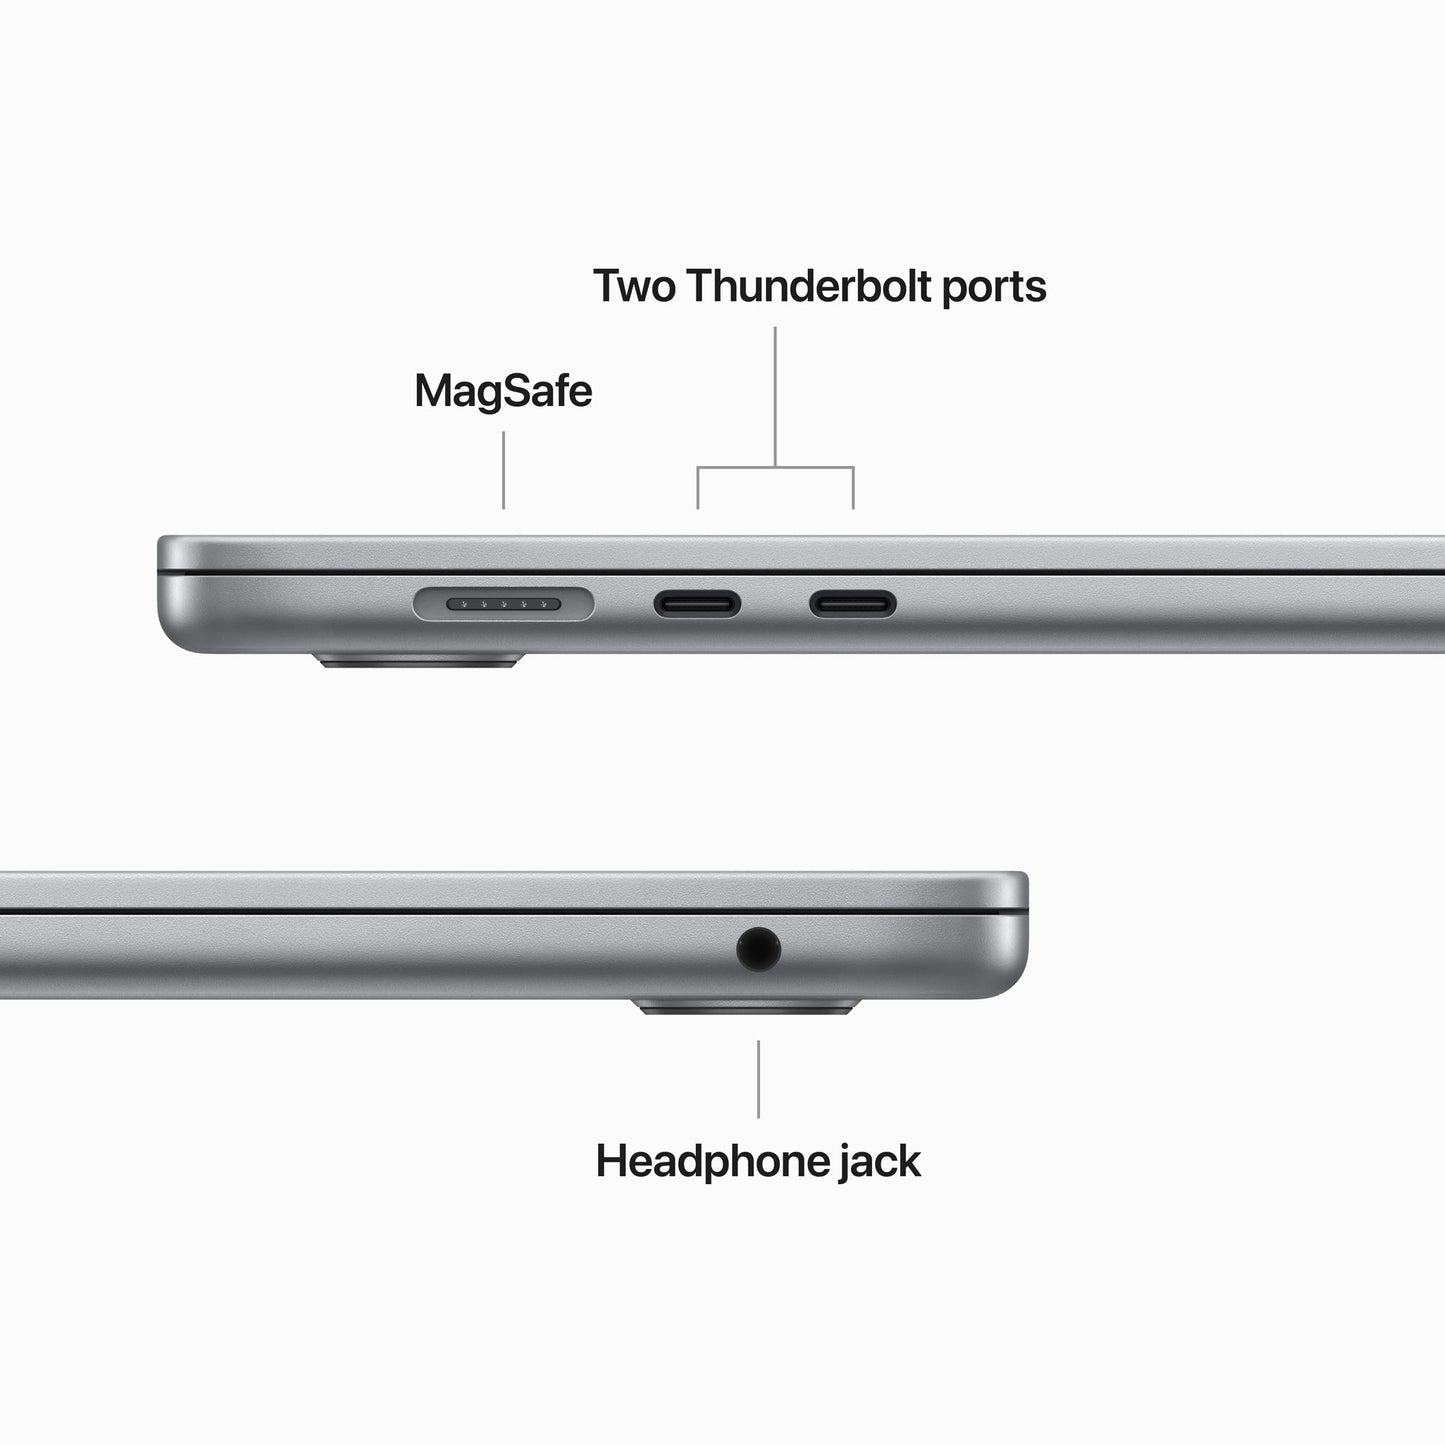 15-inch MacBook Air: Apple M2 chip with 8‑core CPU and 10‑core GPU, 512GB SSD - Space Gray